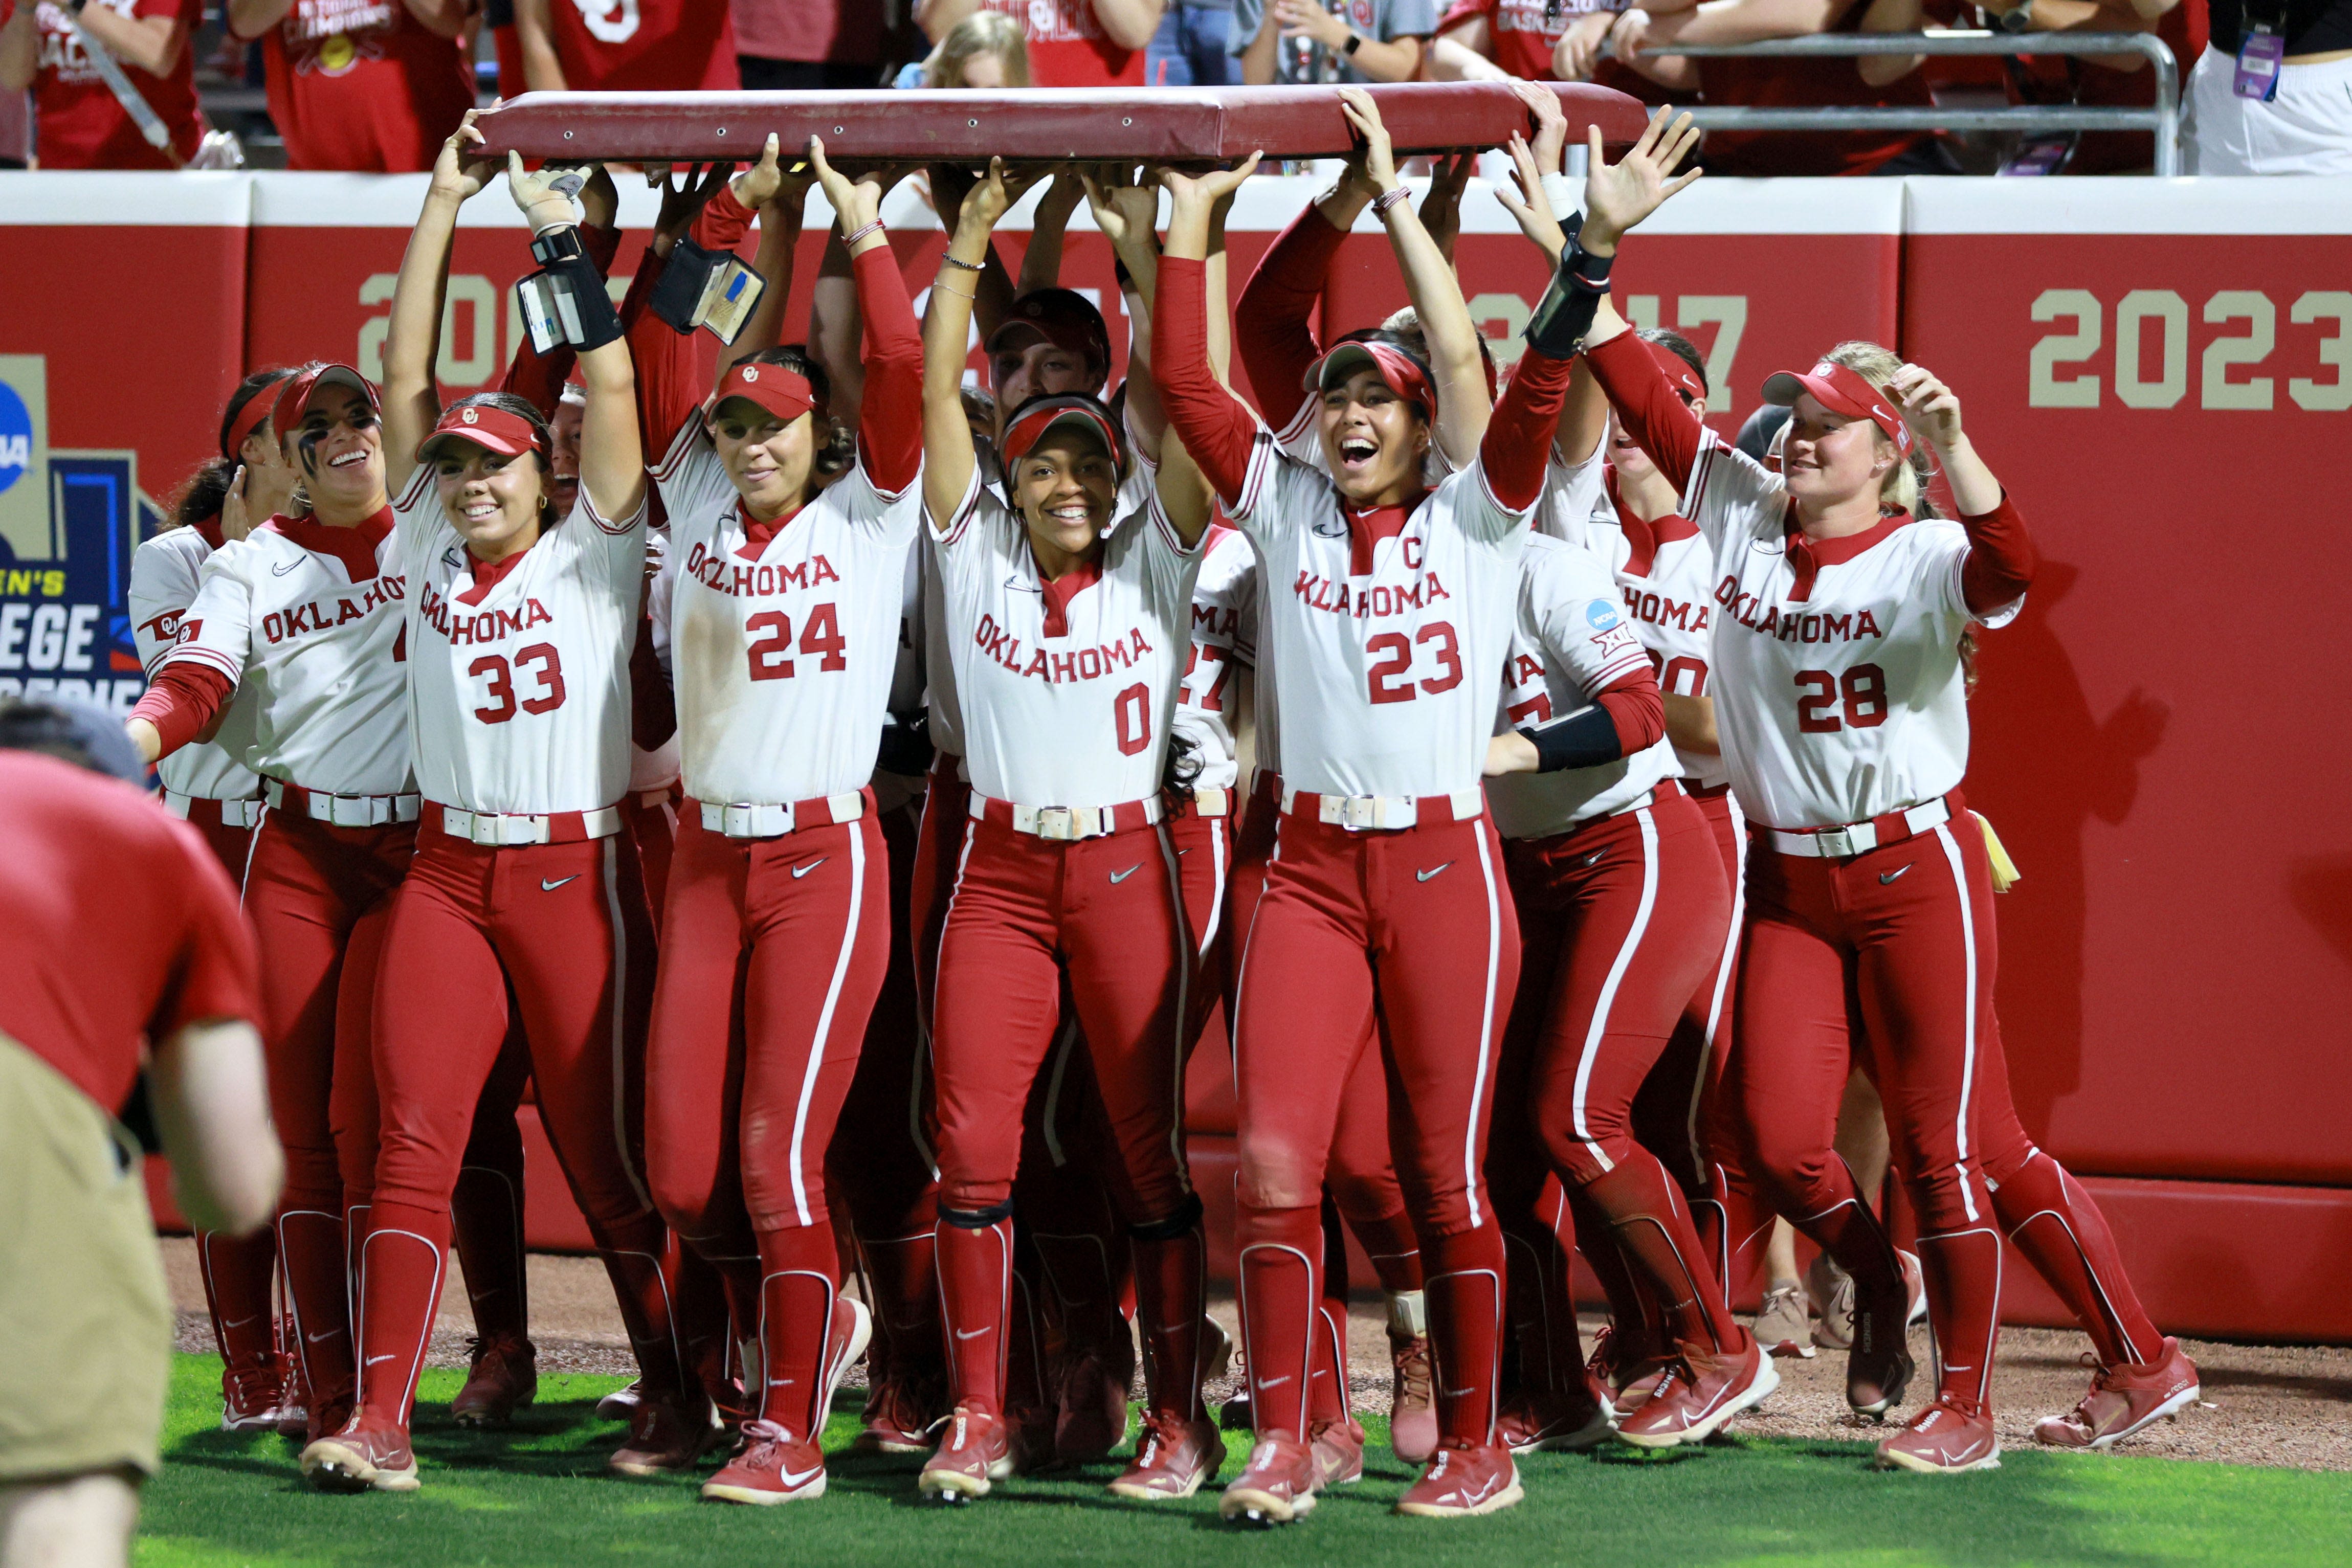 Ranking college softball teams in order of their odds to win Women's College World Series